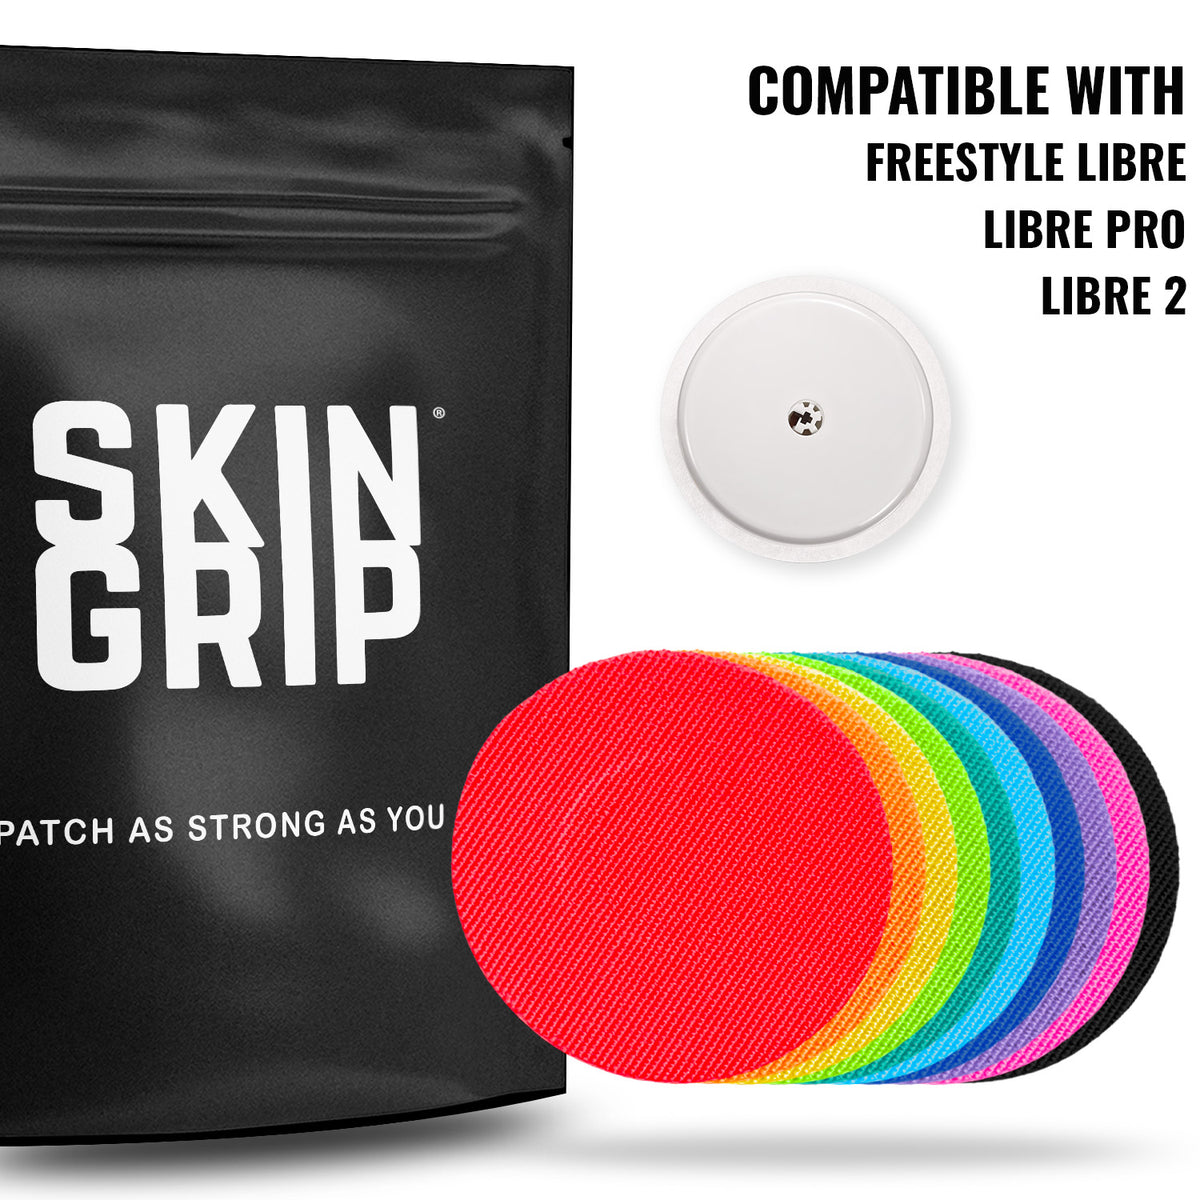 Skin Grip Original - Freestyle Libre Adhesive Patches